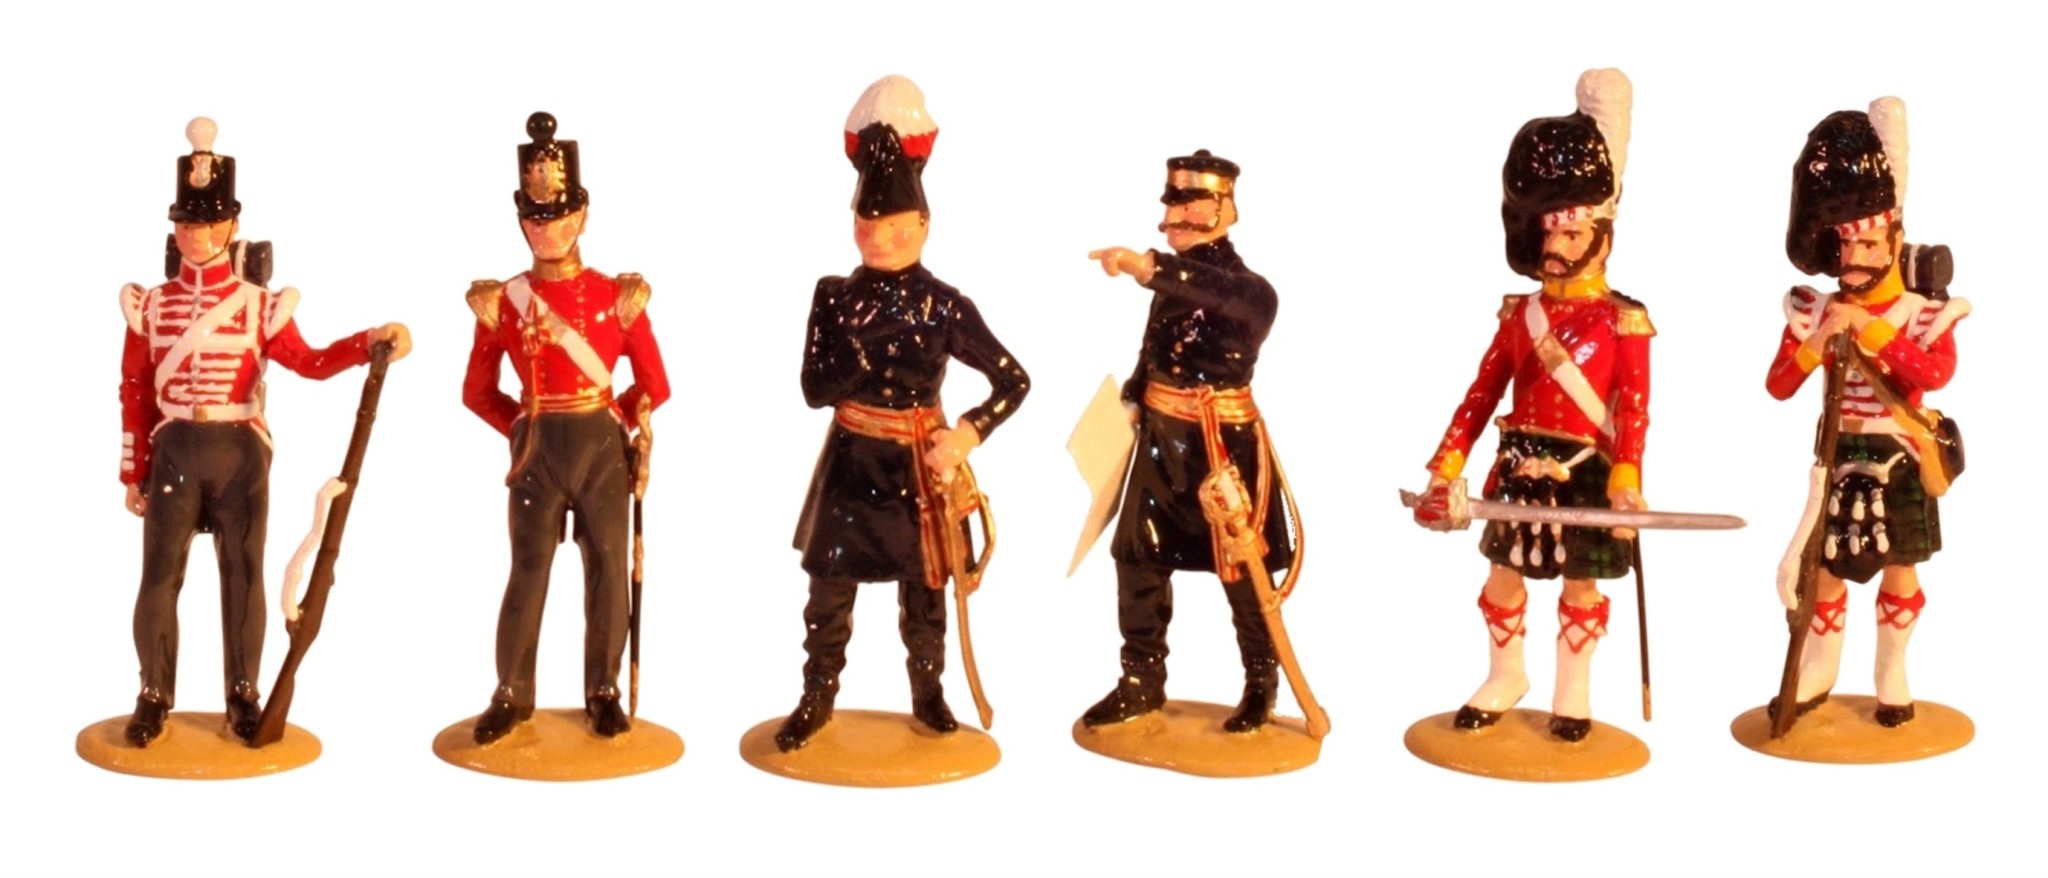 2019 Christmas set - The British Army - The Crimean War - 54mm Painted in Gloss